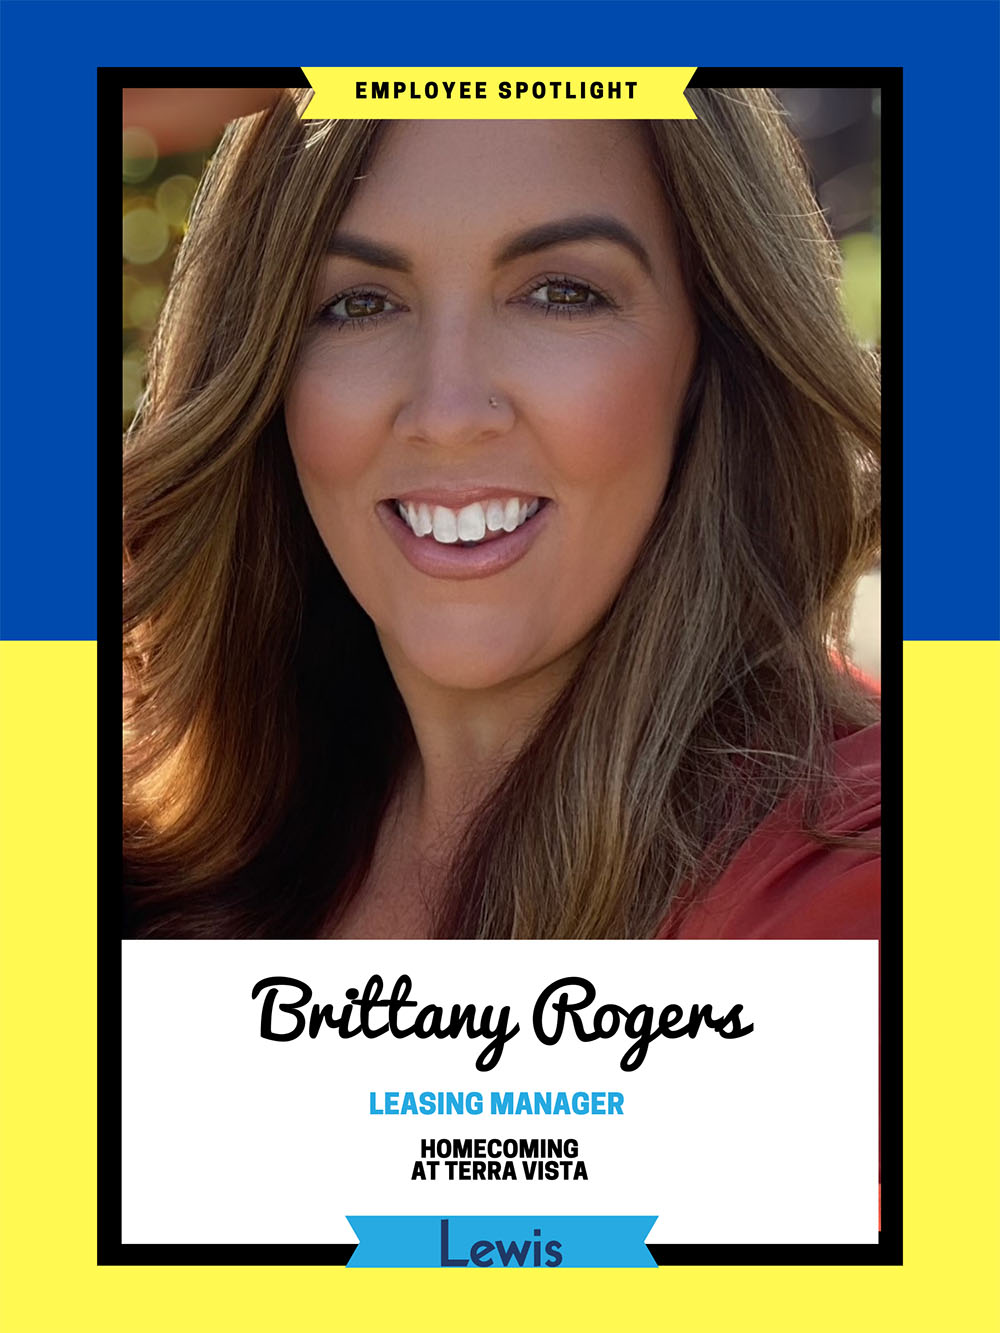 Leasing Consultant Brittany Rogers - Employee Spotlight